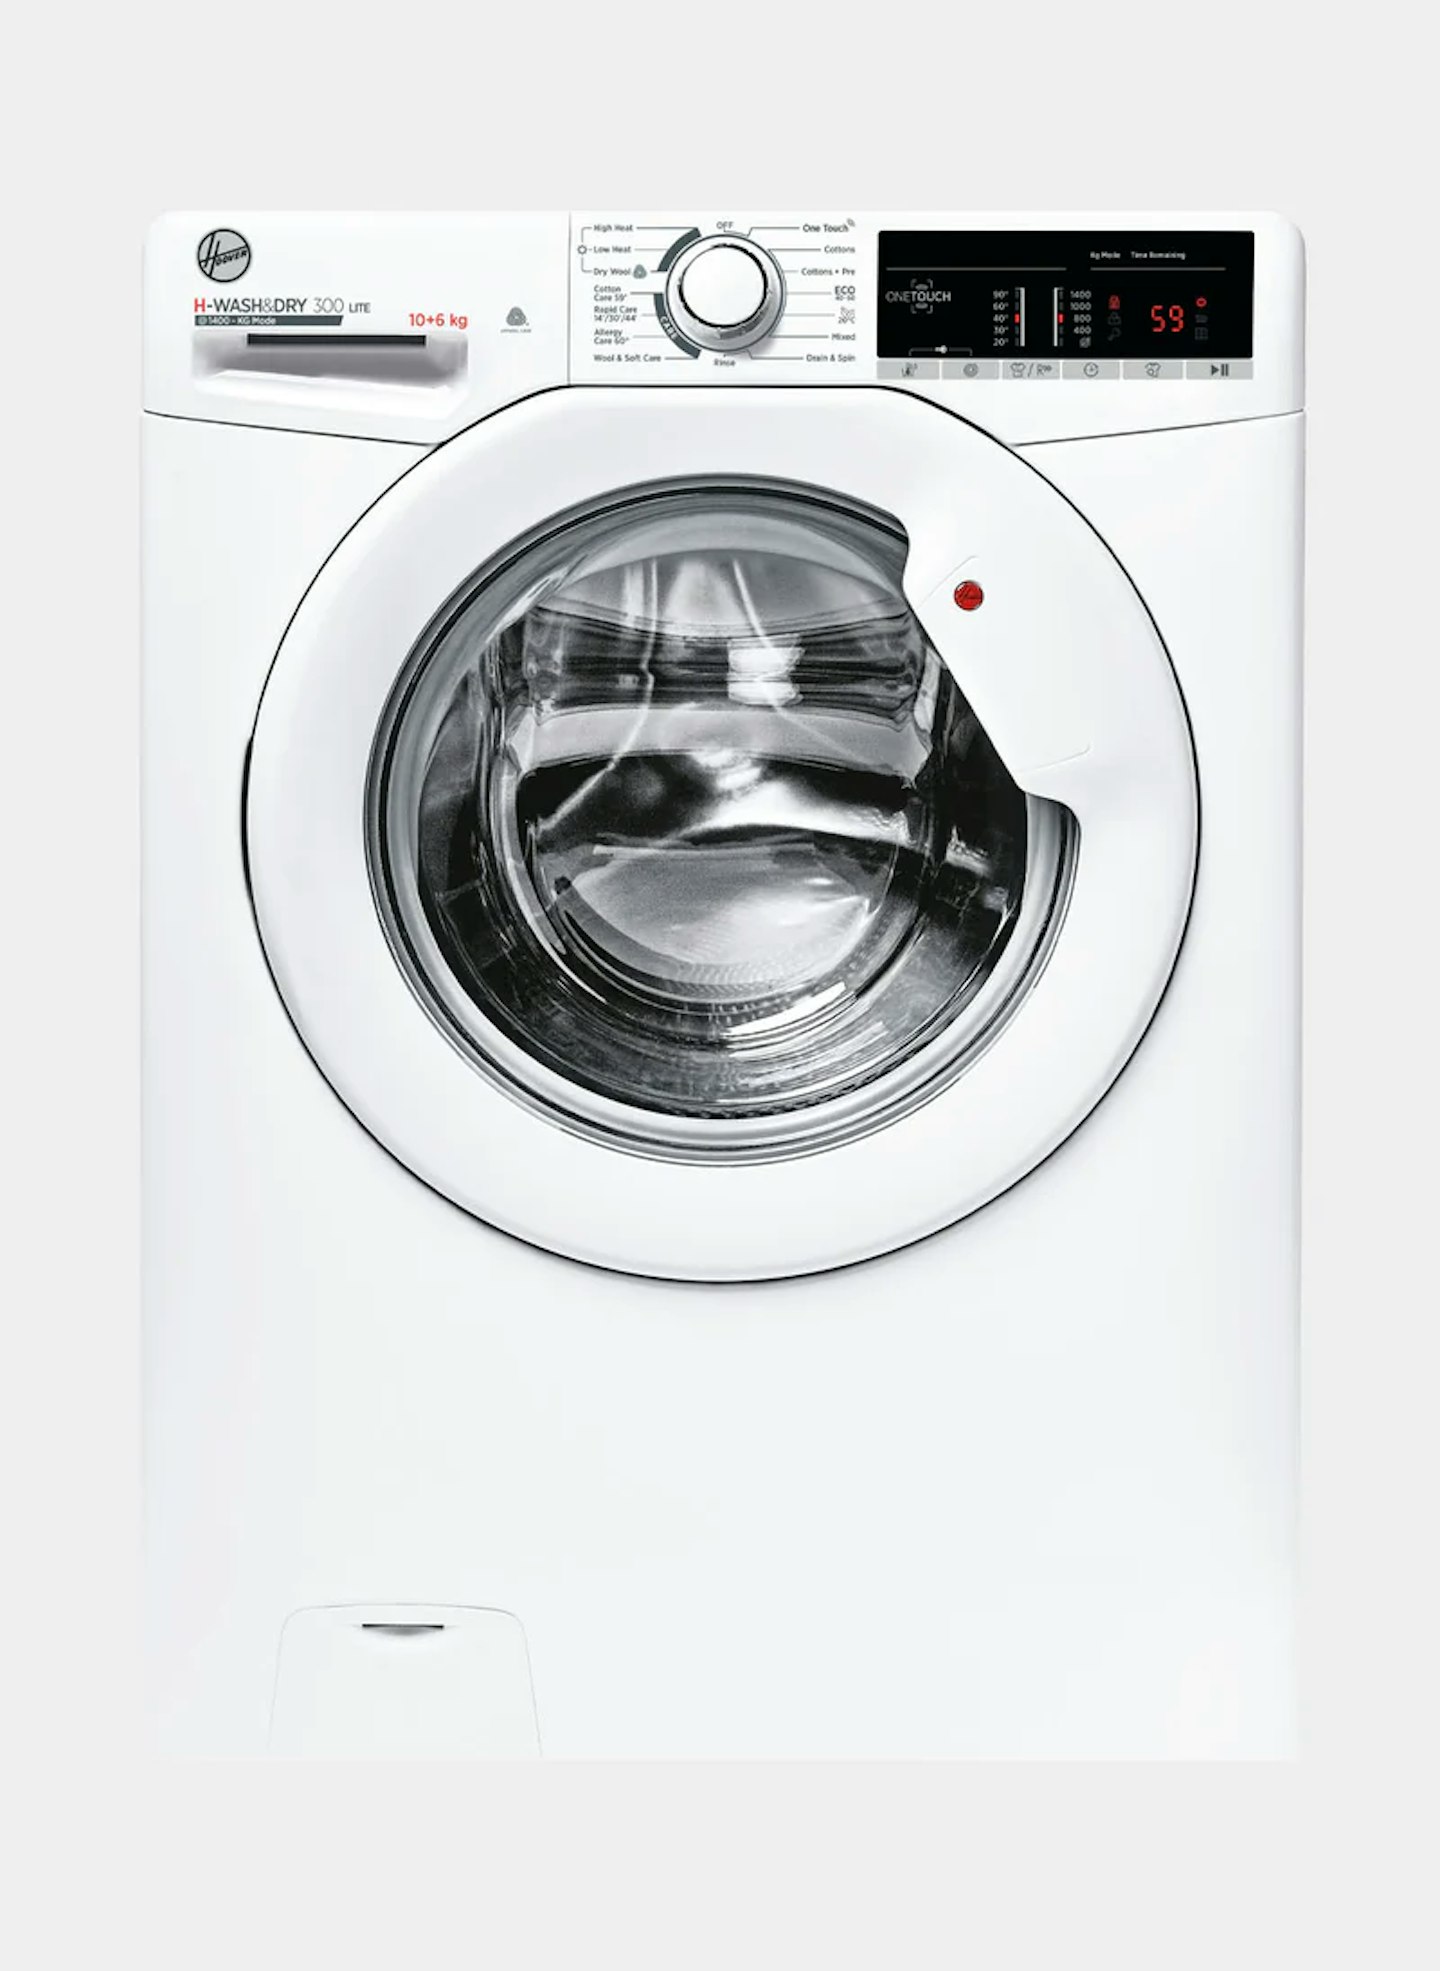 Best tumble dryer Hoover H-WASH & DRY 300– 8kg, Washer Dryer